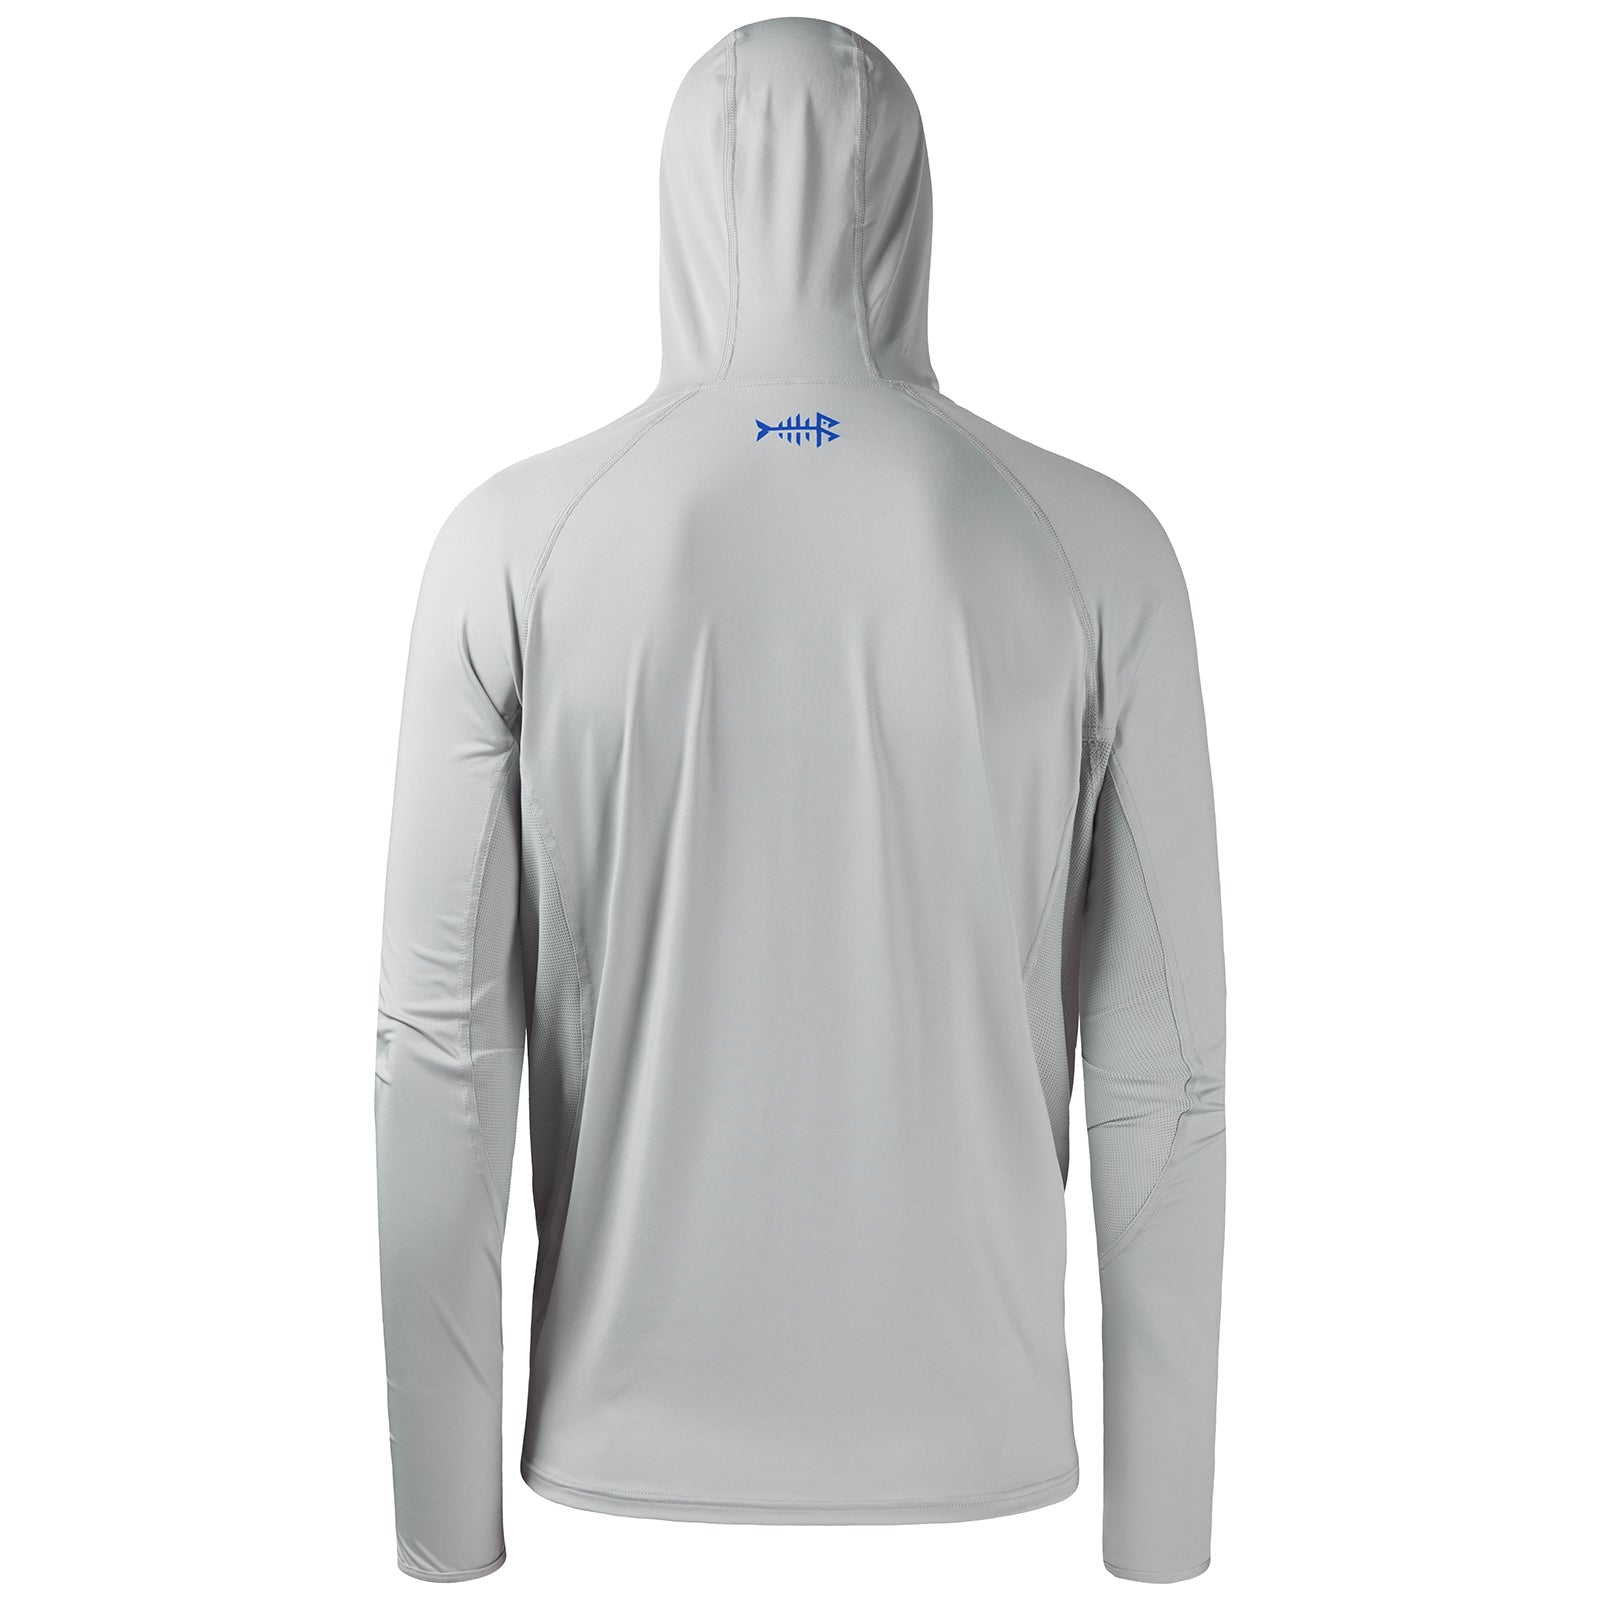 FISHEAL Men's Performance Fishing Hoodie Shirt - UPF 50+ Sun Protection  Long Sleeve Thumbholes Shirts with Neck Gaiter - UV Protection - High  Quality - Affordable Prices